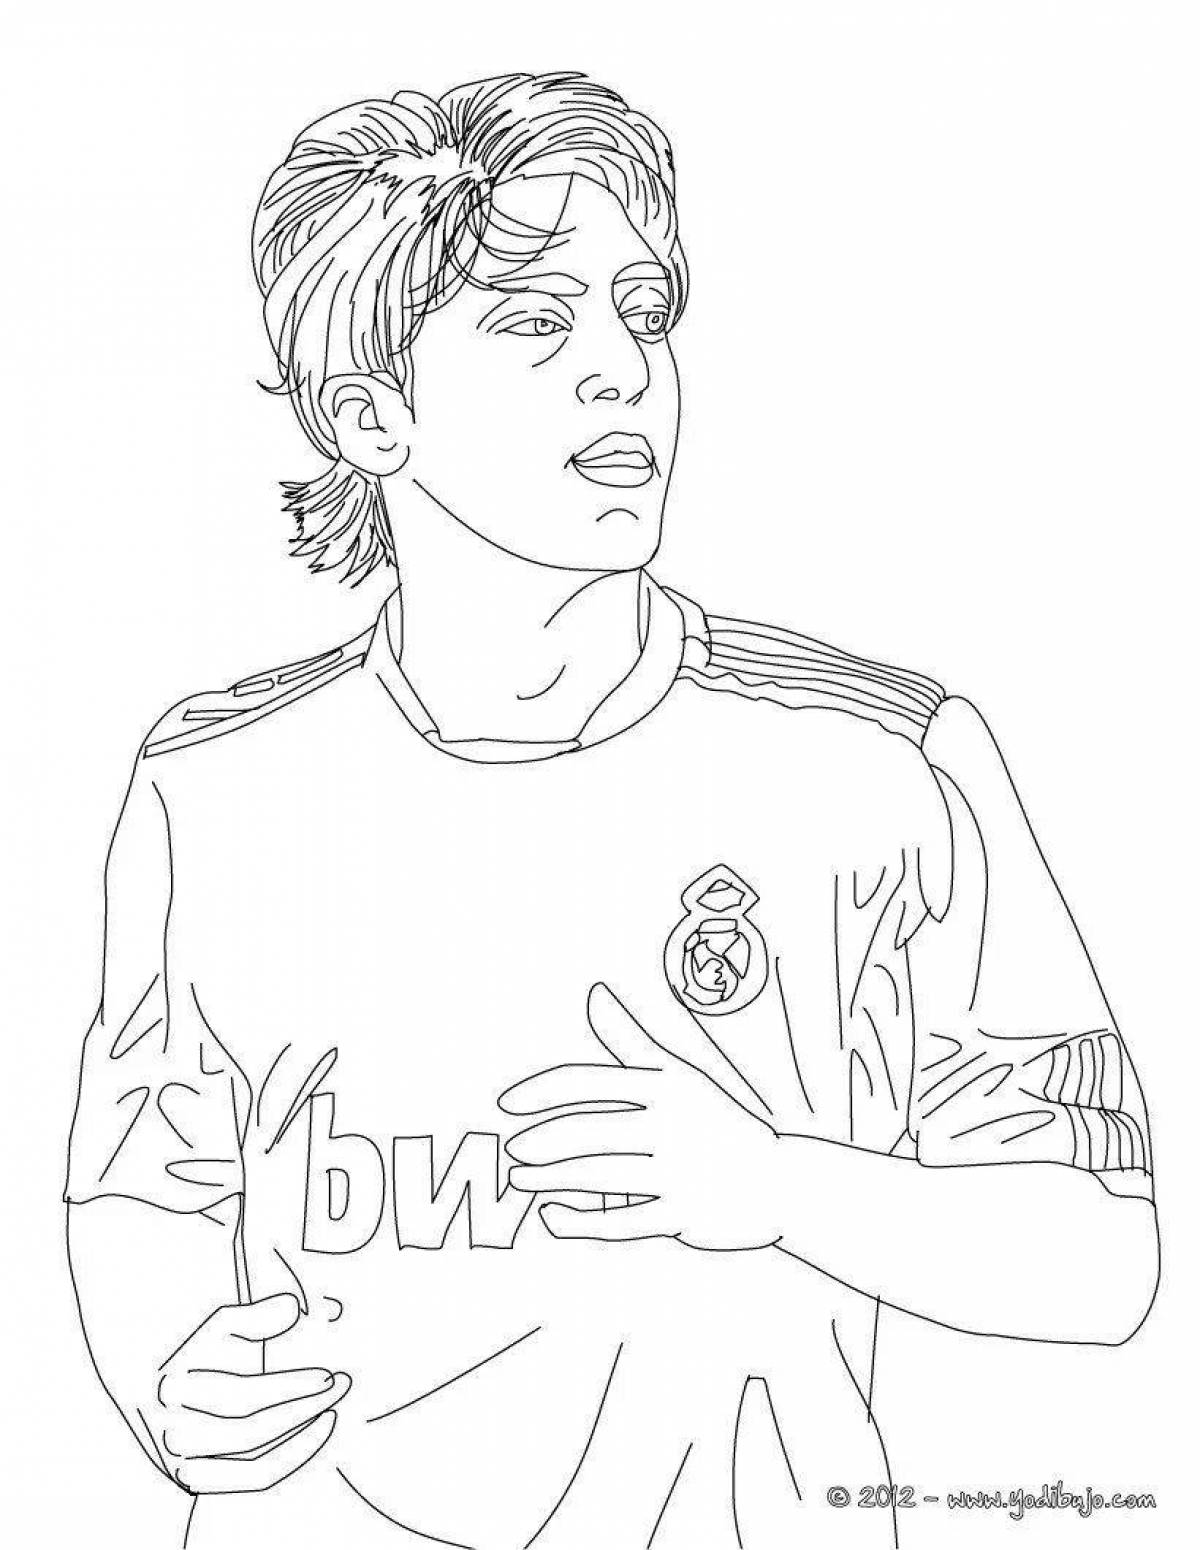 Cute messi soccer player coloring book